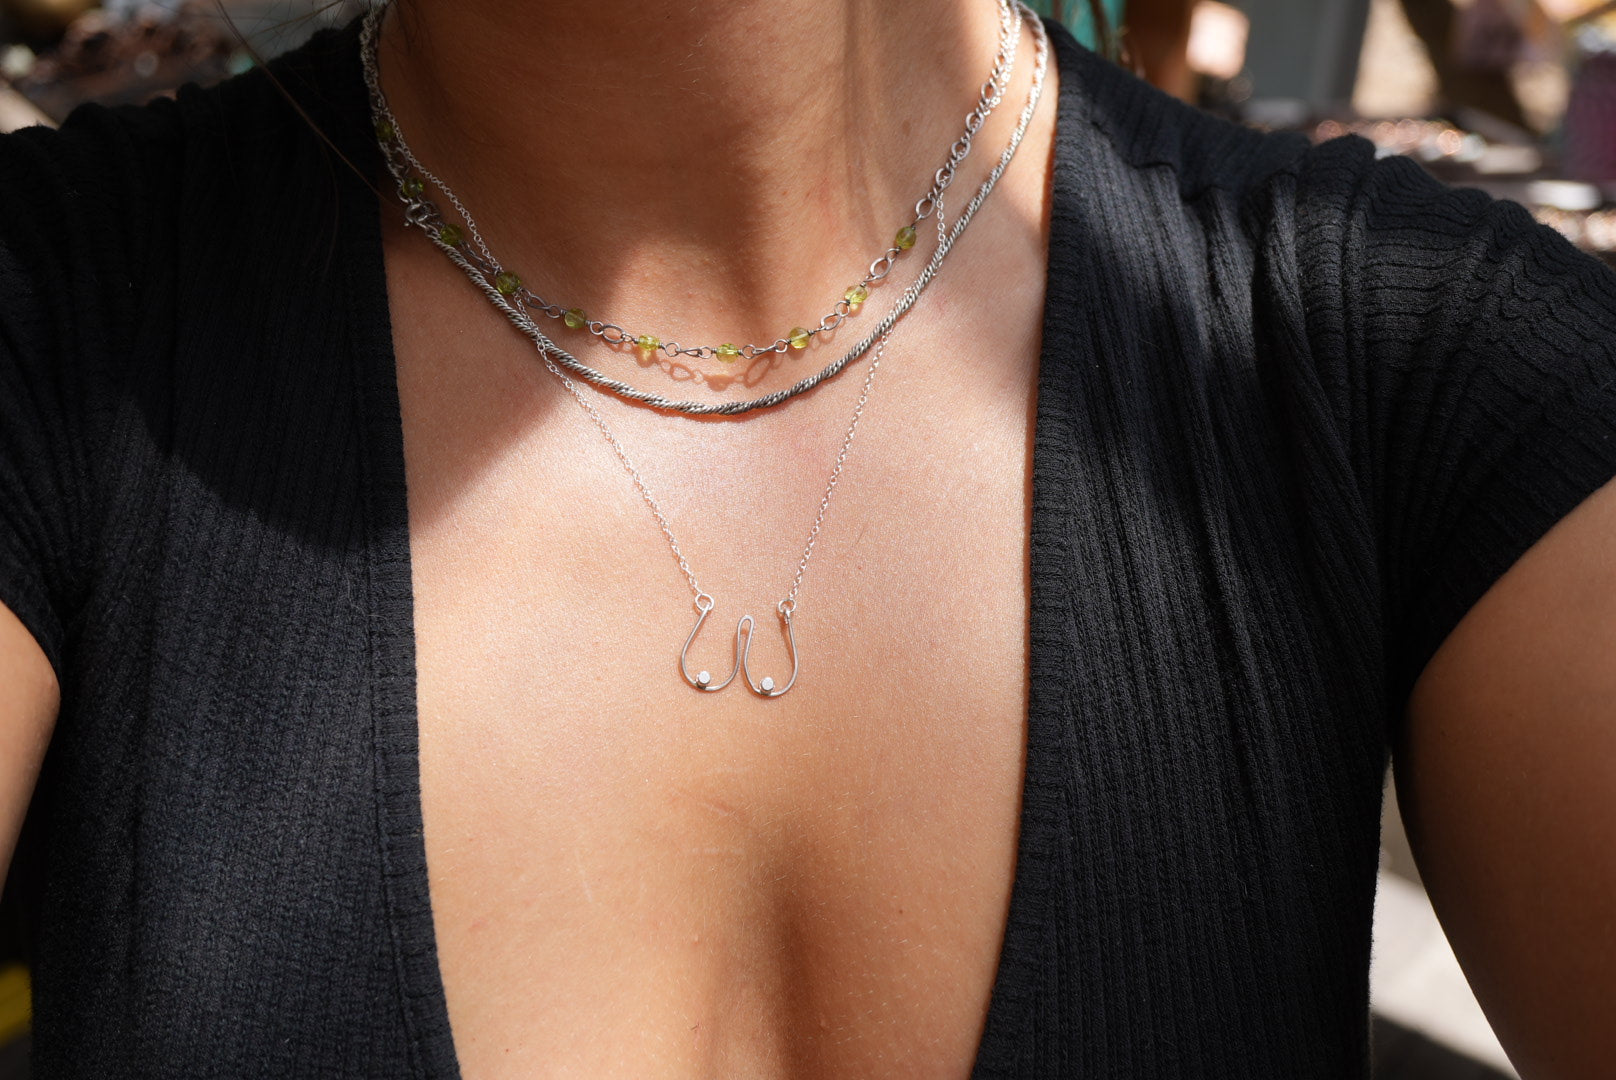 Sterling Boobie Necklace, Silver Boob Necklace